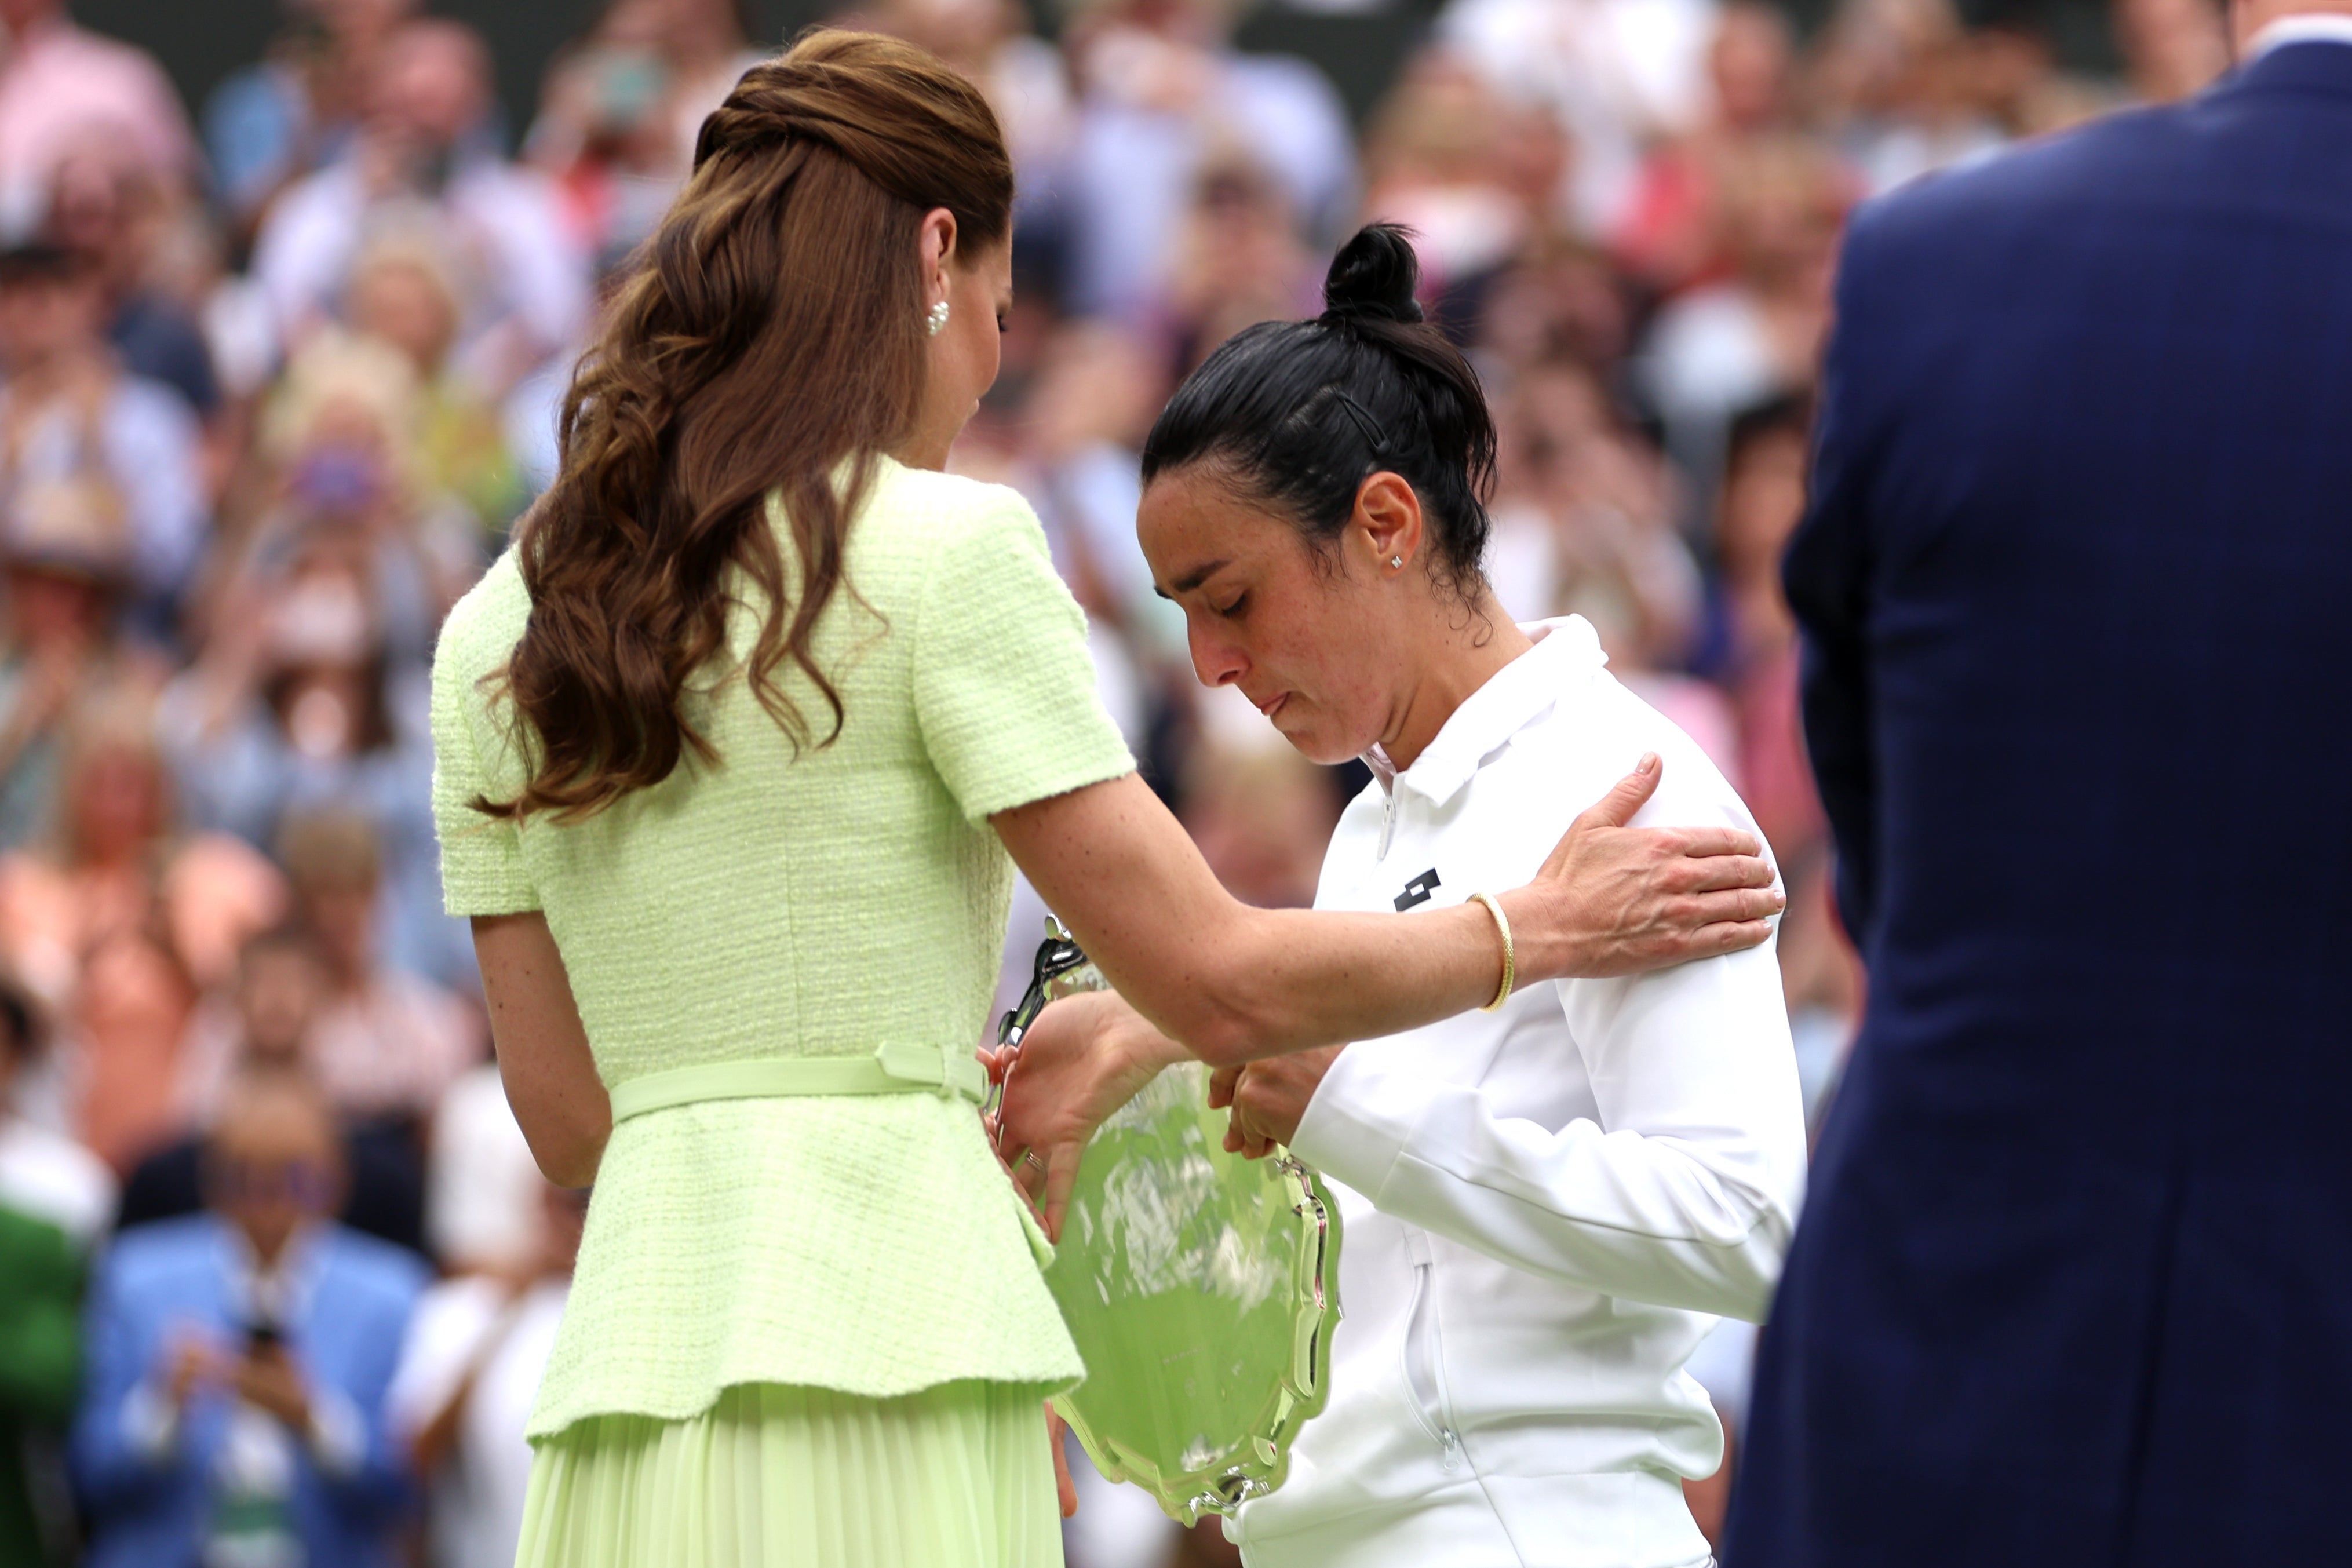 Jabeur was in tears as she collected the runner-up shield for the second year running from the Princess of Wales